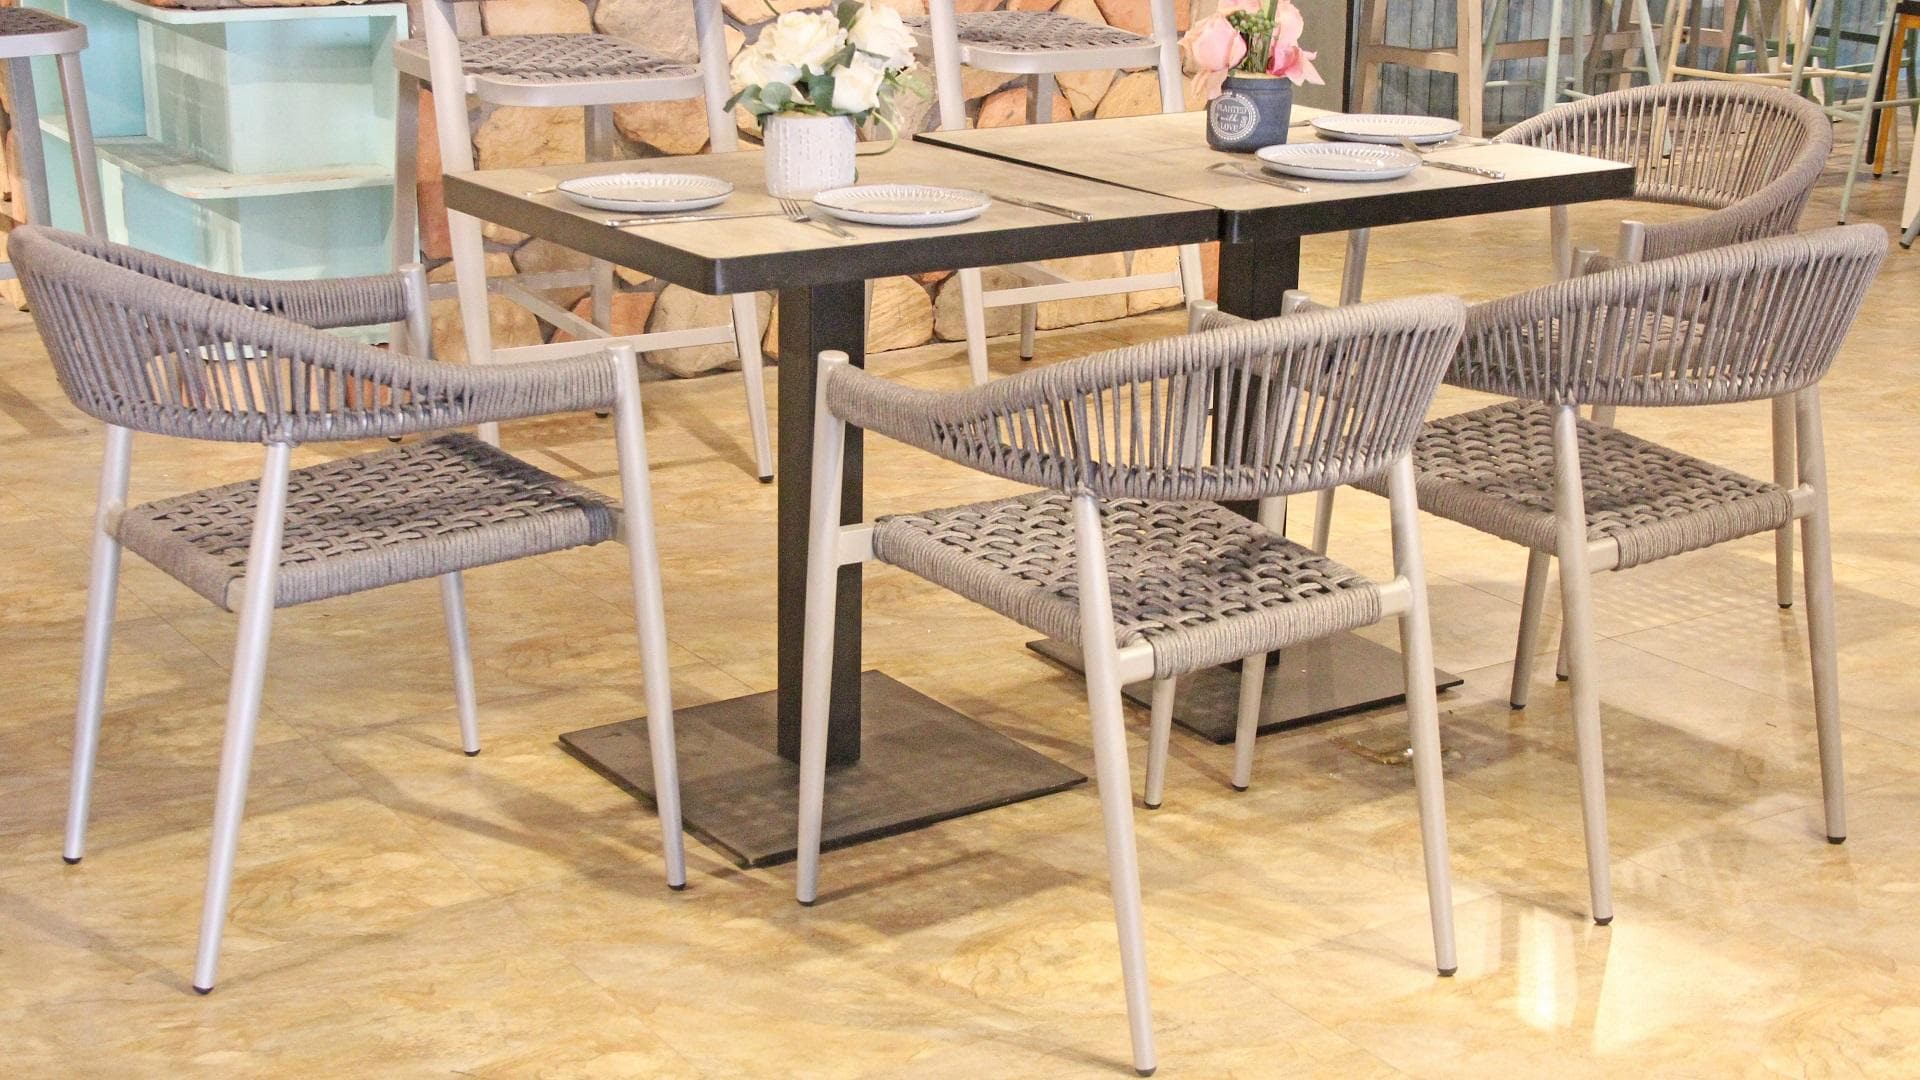 Bistro Outside Garden Waterproof Wicker Furniture Tables and Chairs Sets 315MS-H45-ALU-ROTX